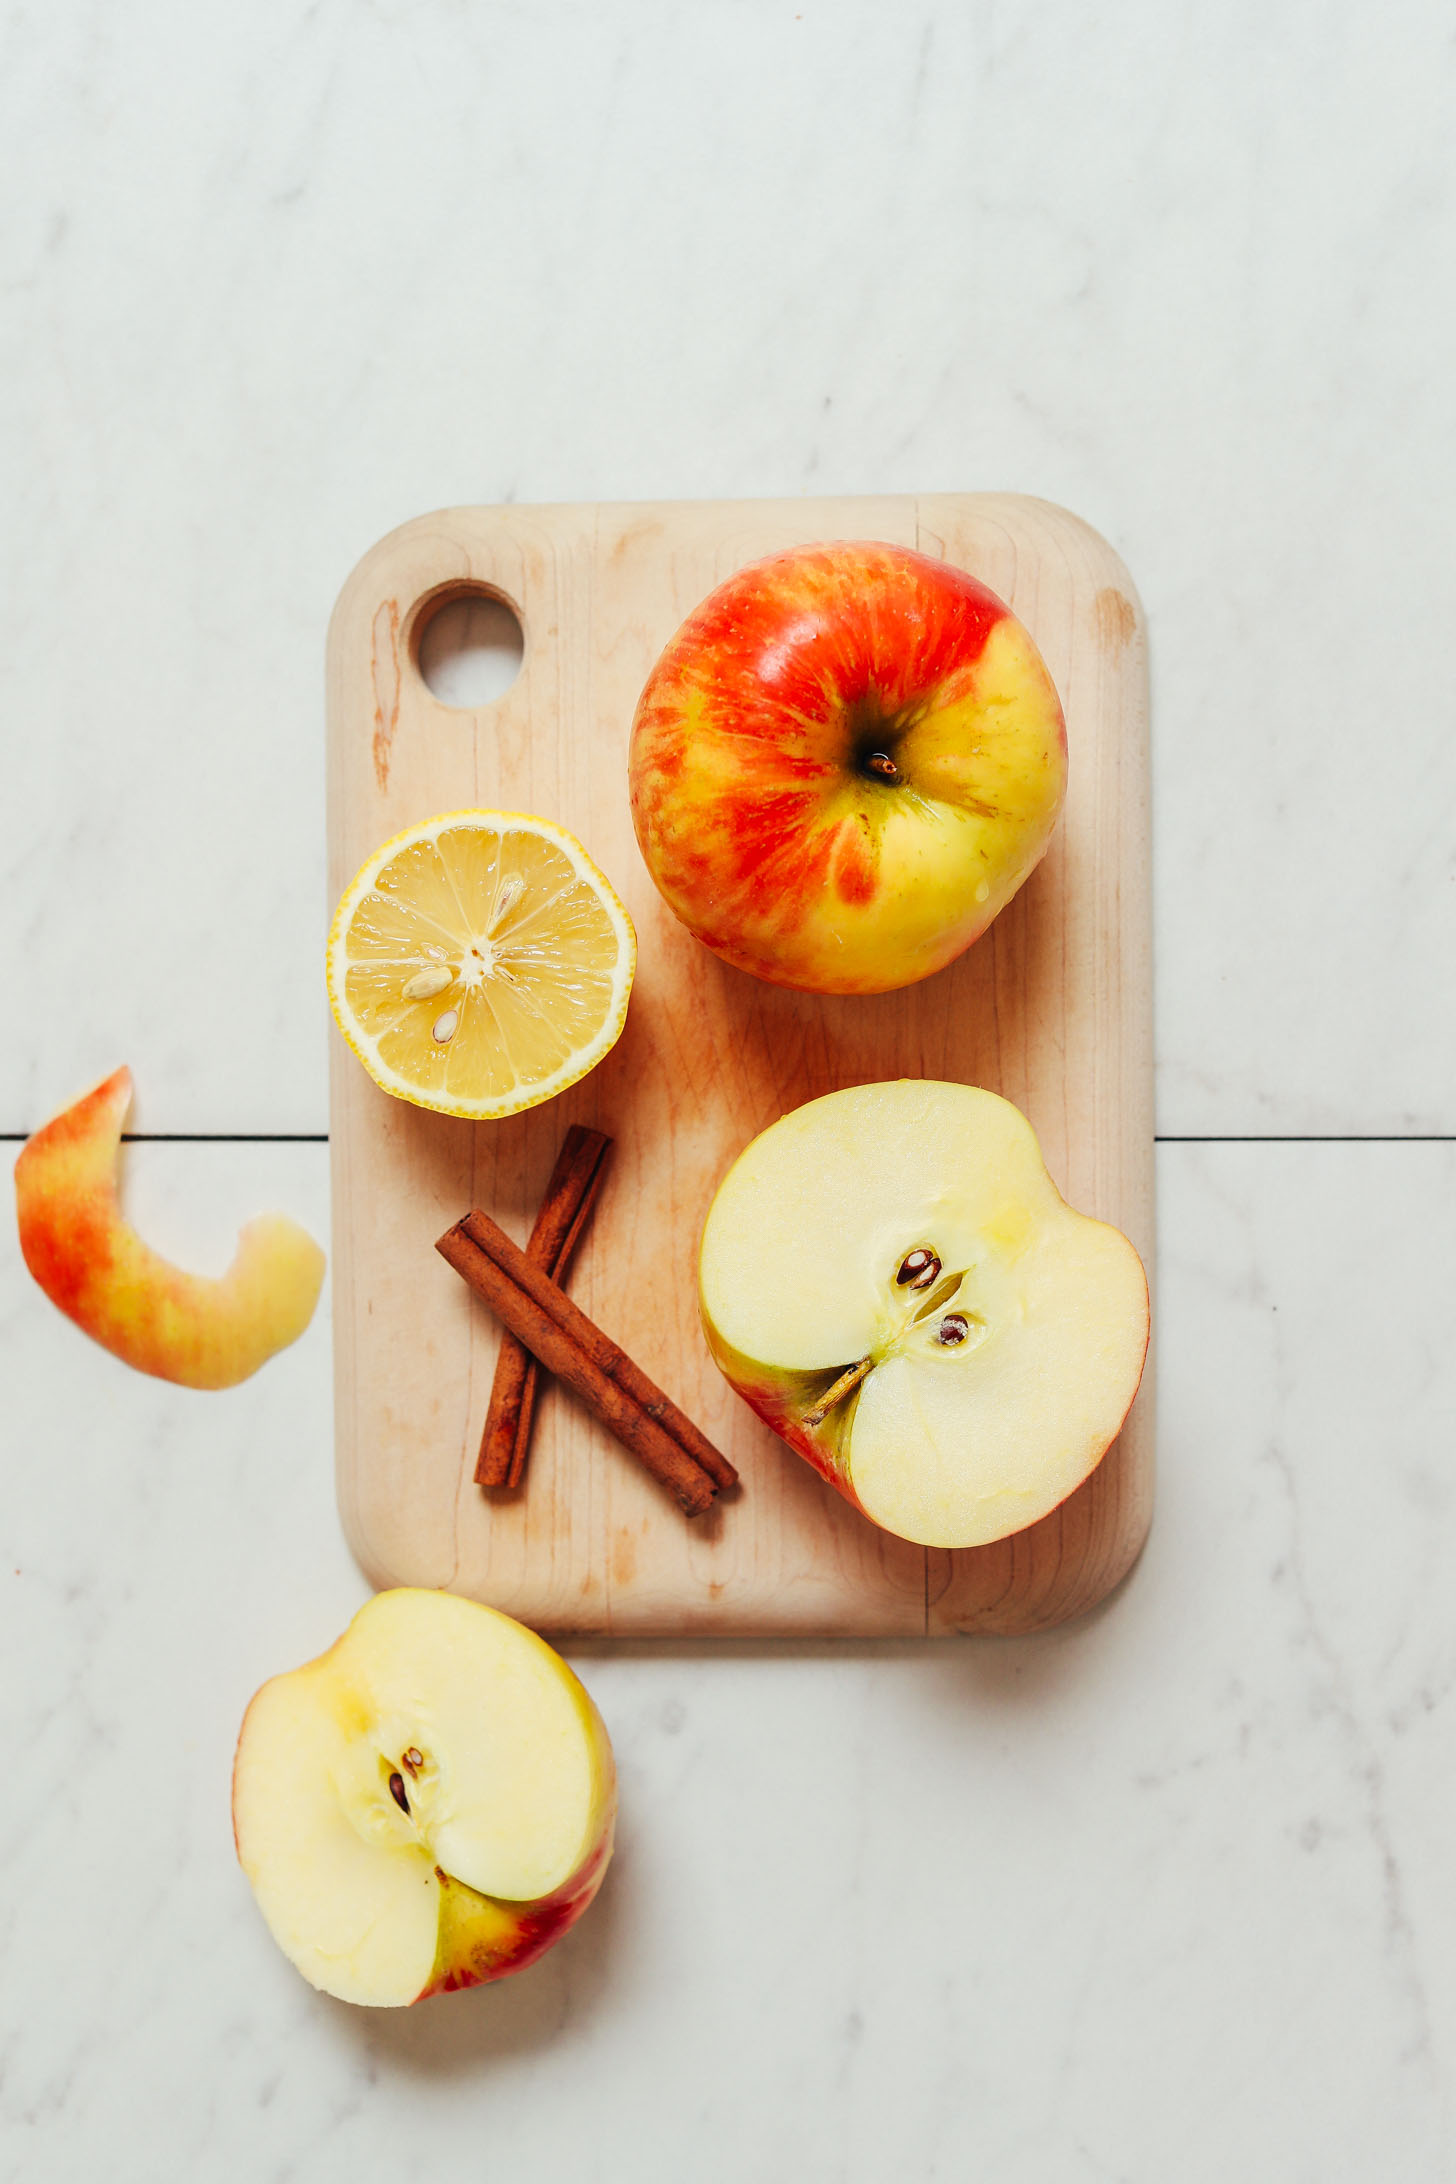 Cutting board with apples, lemon, and cinnamon sticks